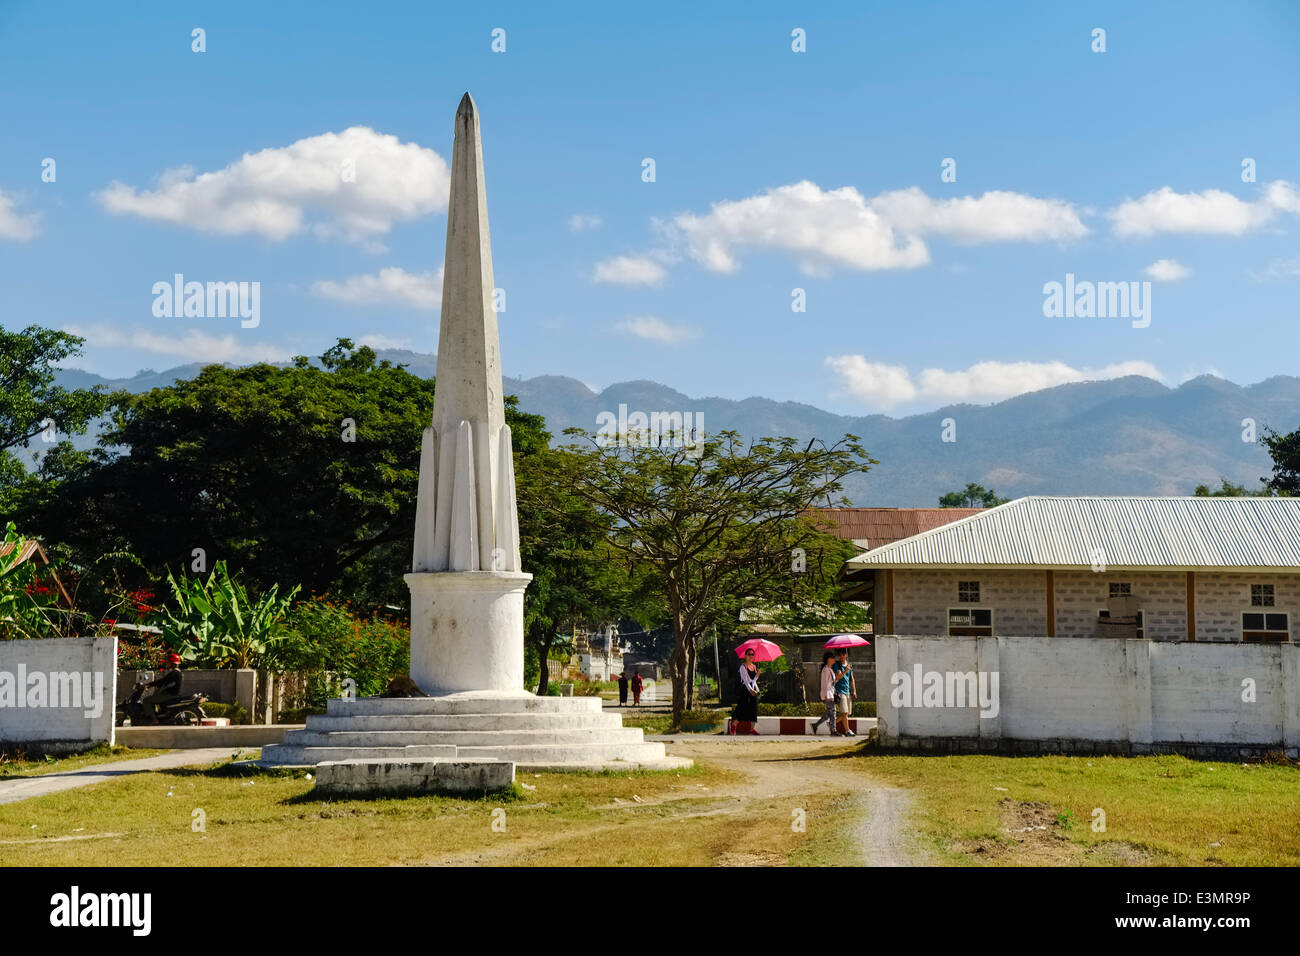 Independence Monument in Nyaung Shwe, Myanmar, Asia Stock Photo